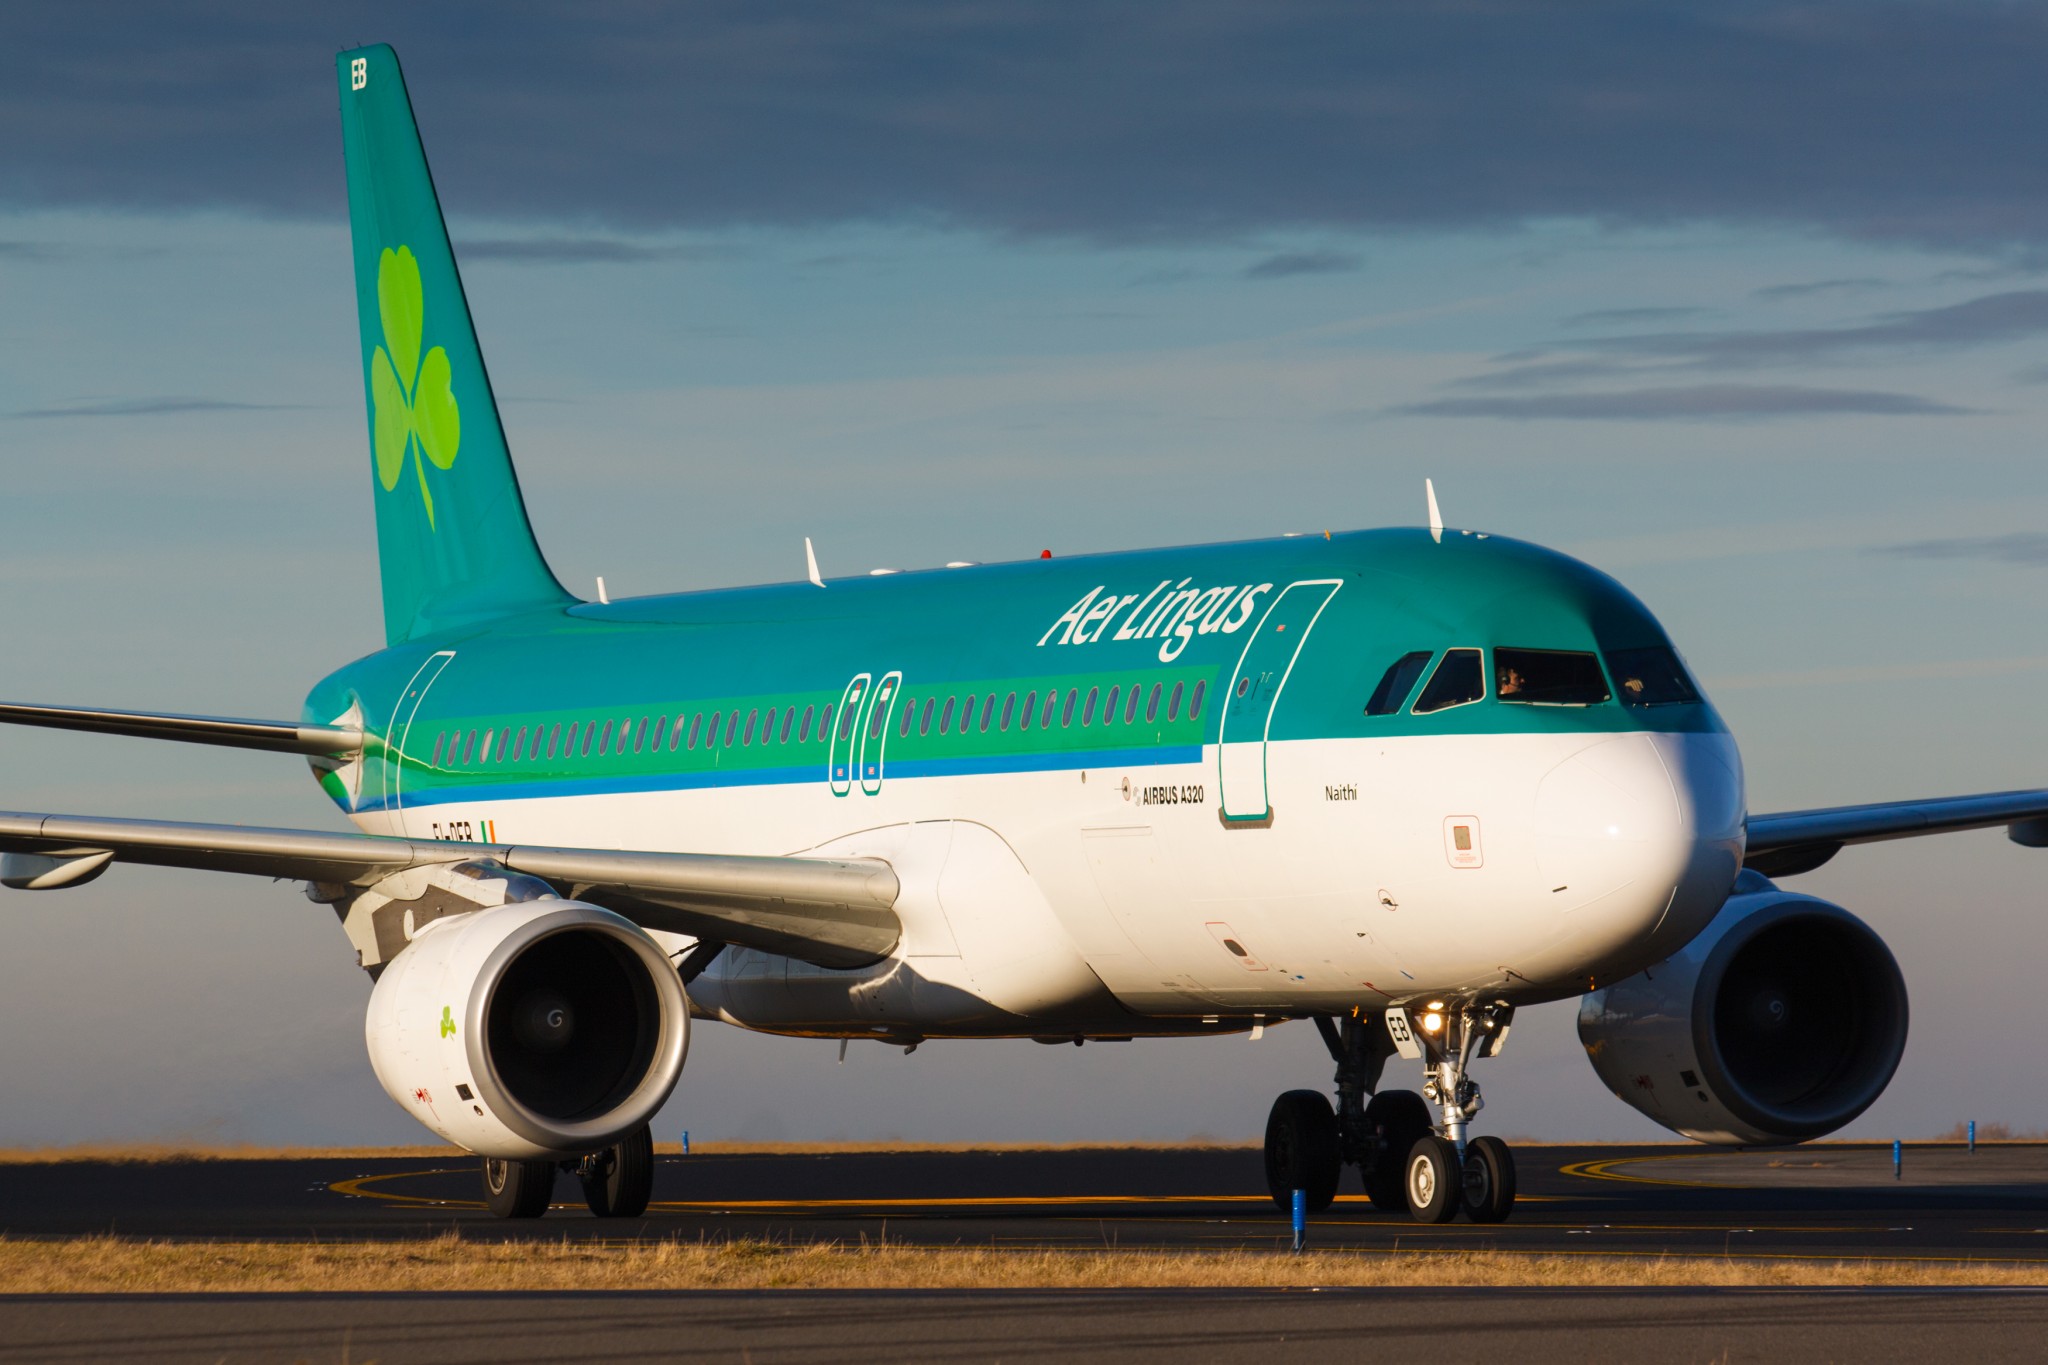 Aer Lingus takes delivery of its third A320neo